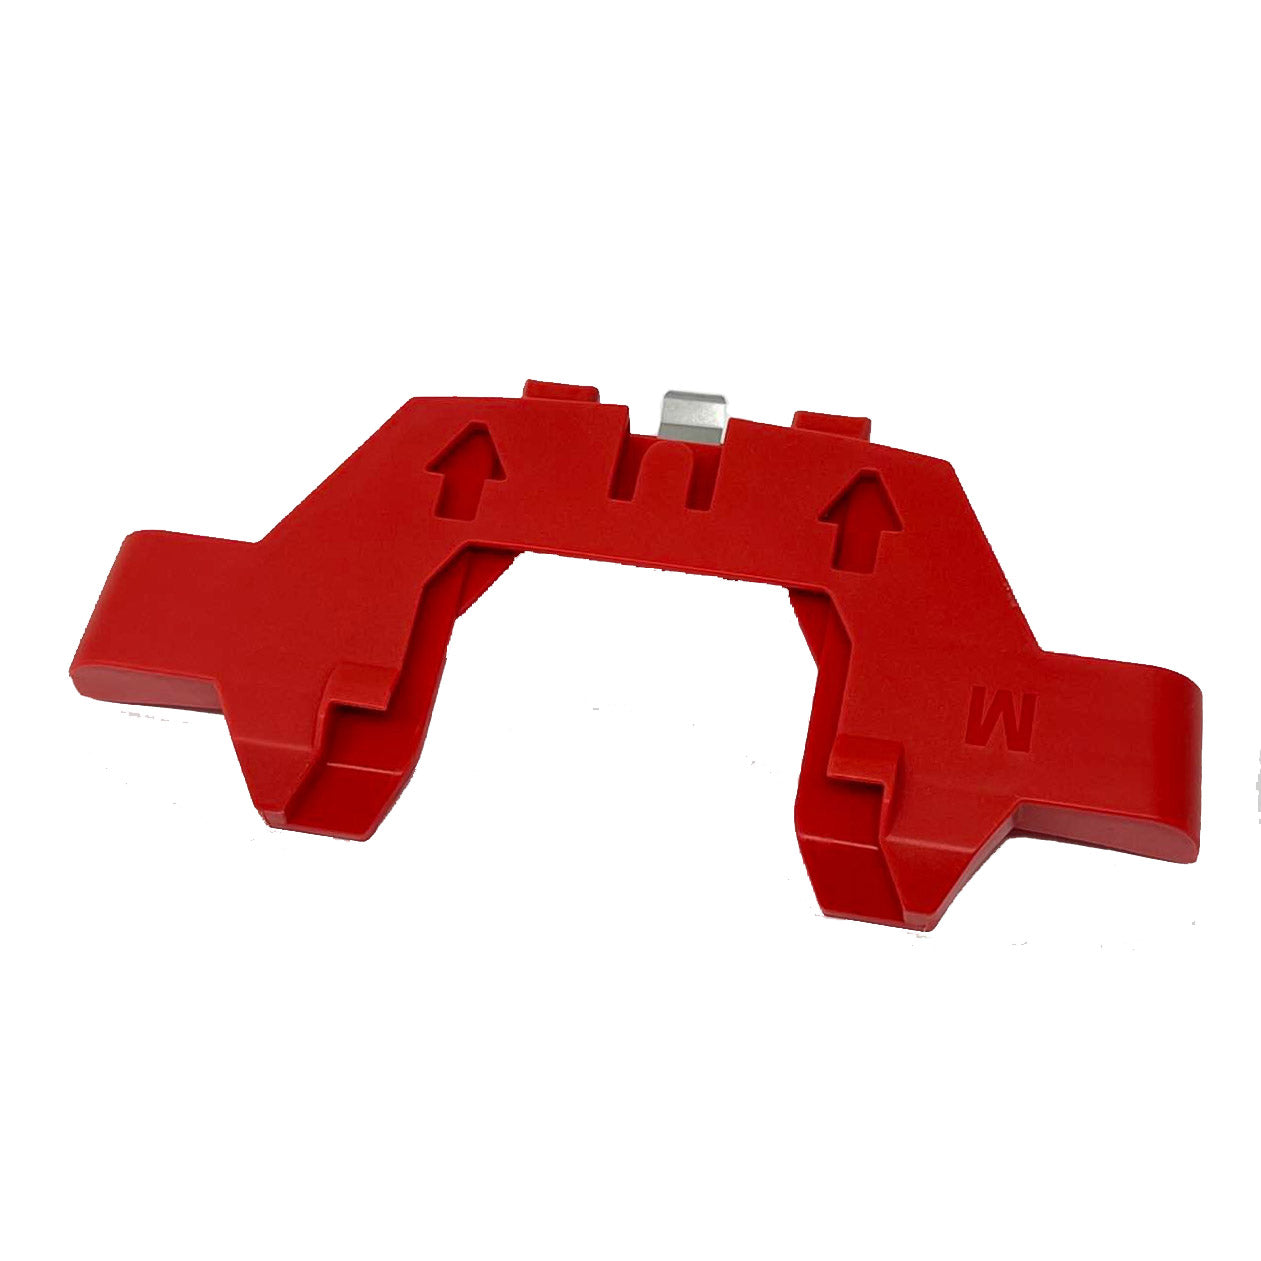 Miele Dustbag Bracket, Red